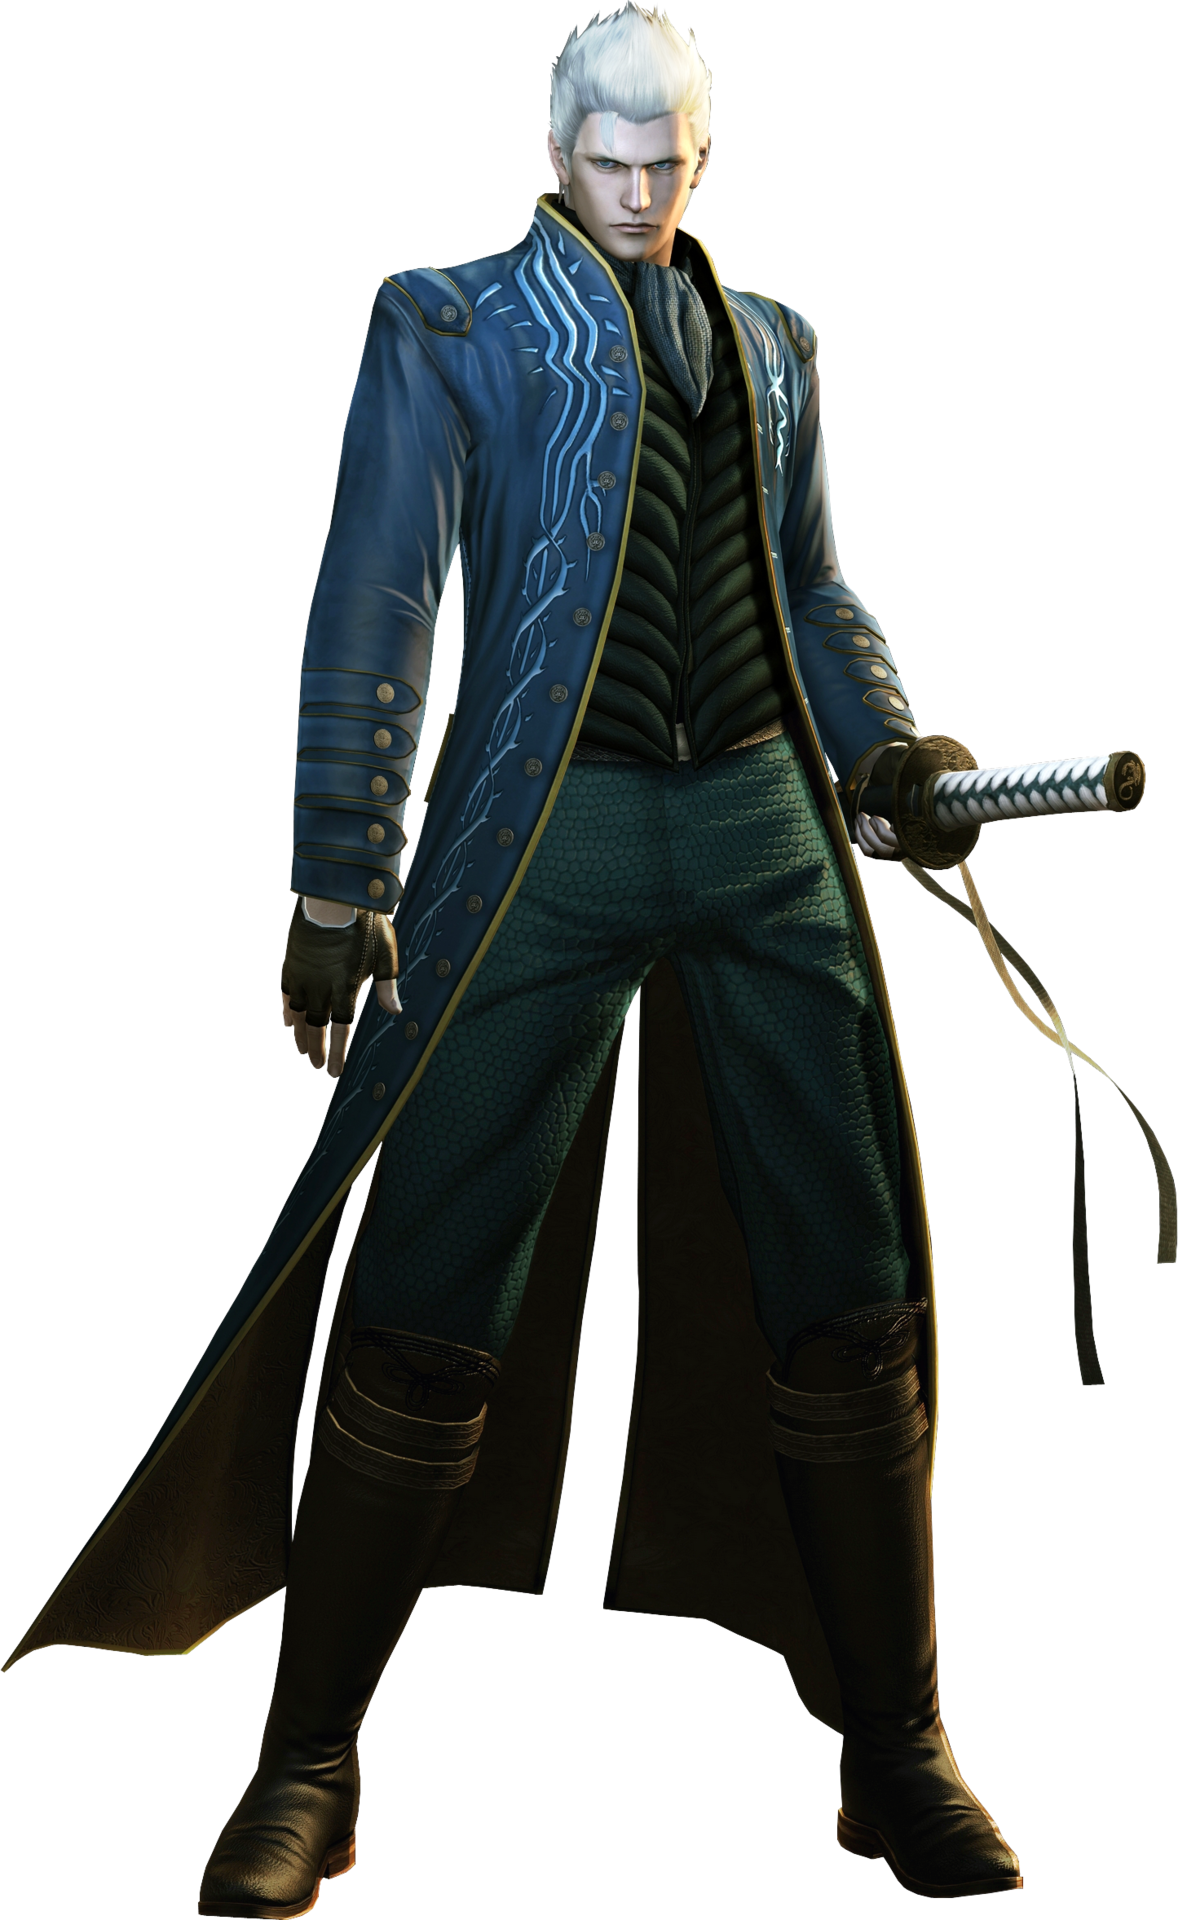 YOU DEFEATED #1 – Vergil (DmC: Devil May Cry)